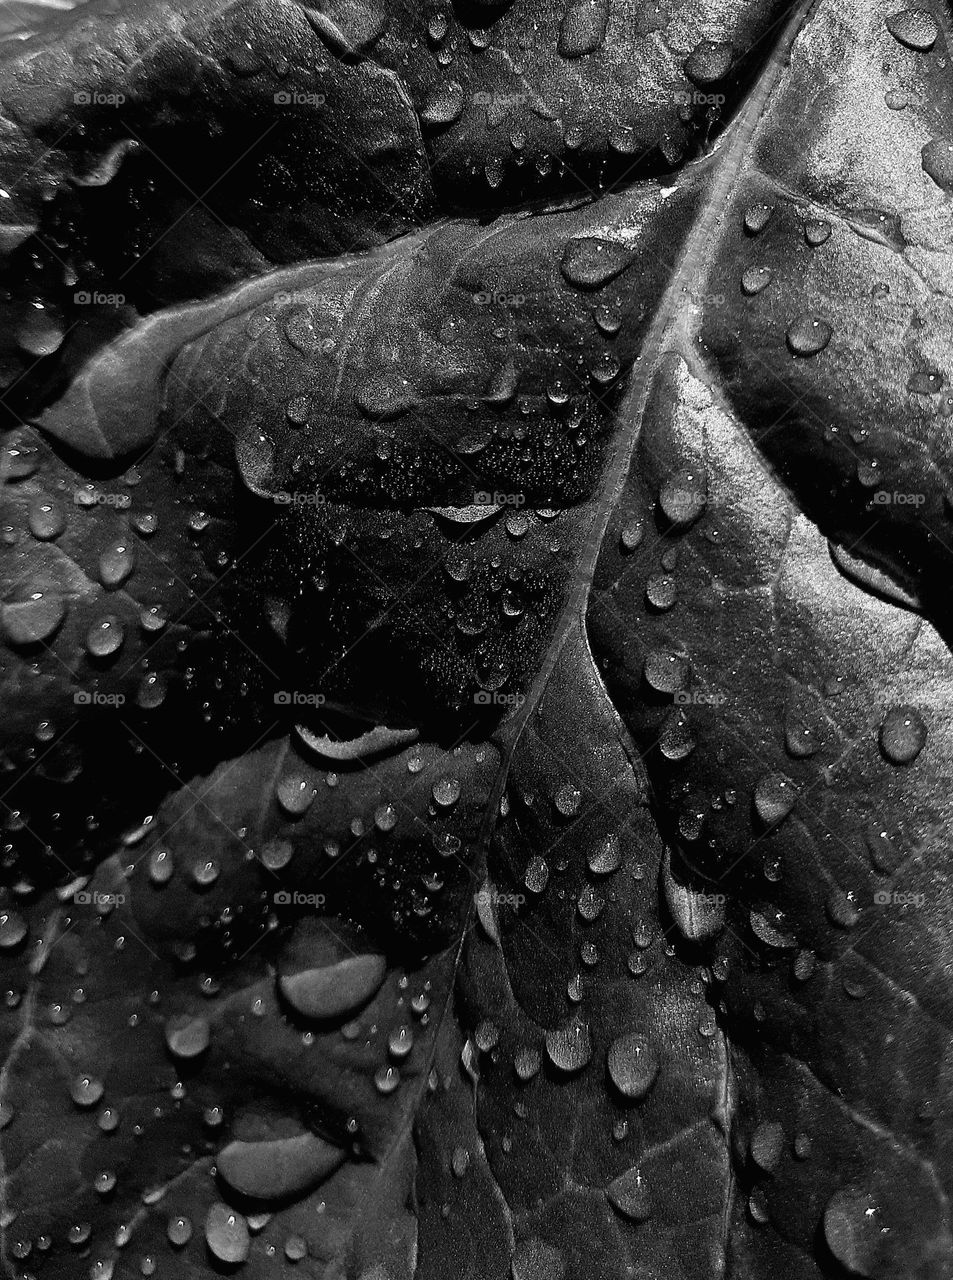 black and white contrast photo of a leaf from under fodder beet with dew drops of different sizes on it